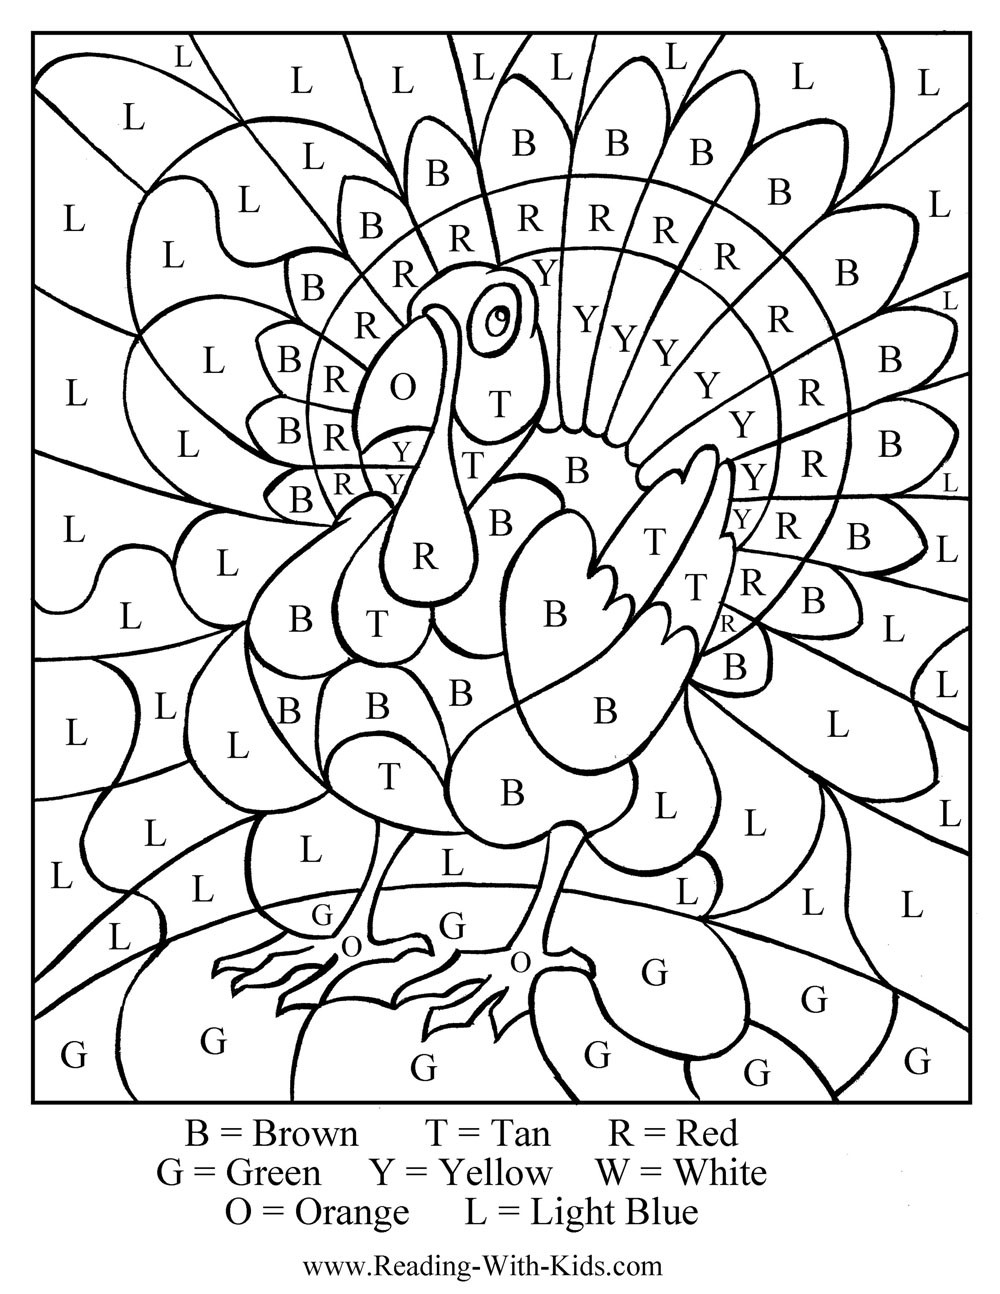 Thanksgiving Coloring Pages For Kids
 Free Thanksgiving Coloring Pages & Games Printables